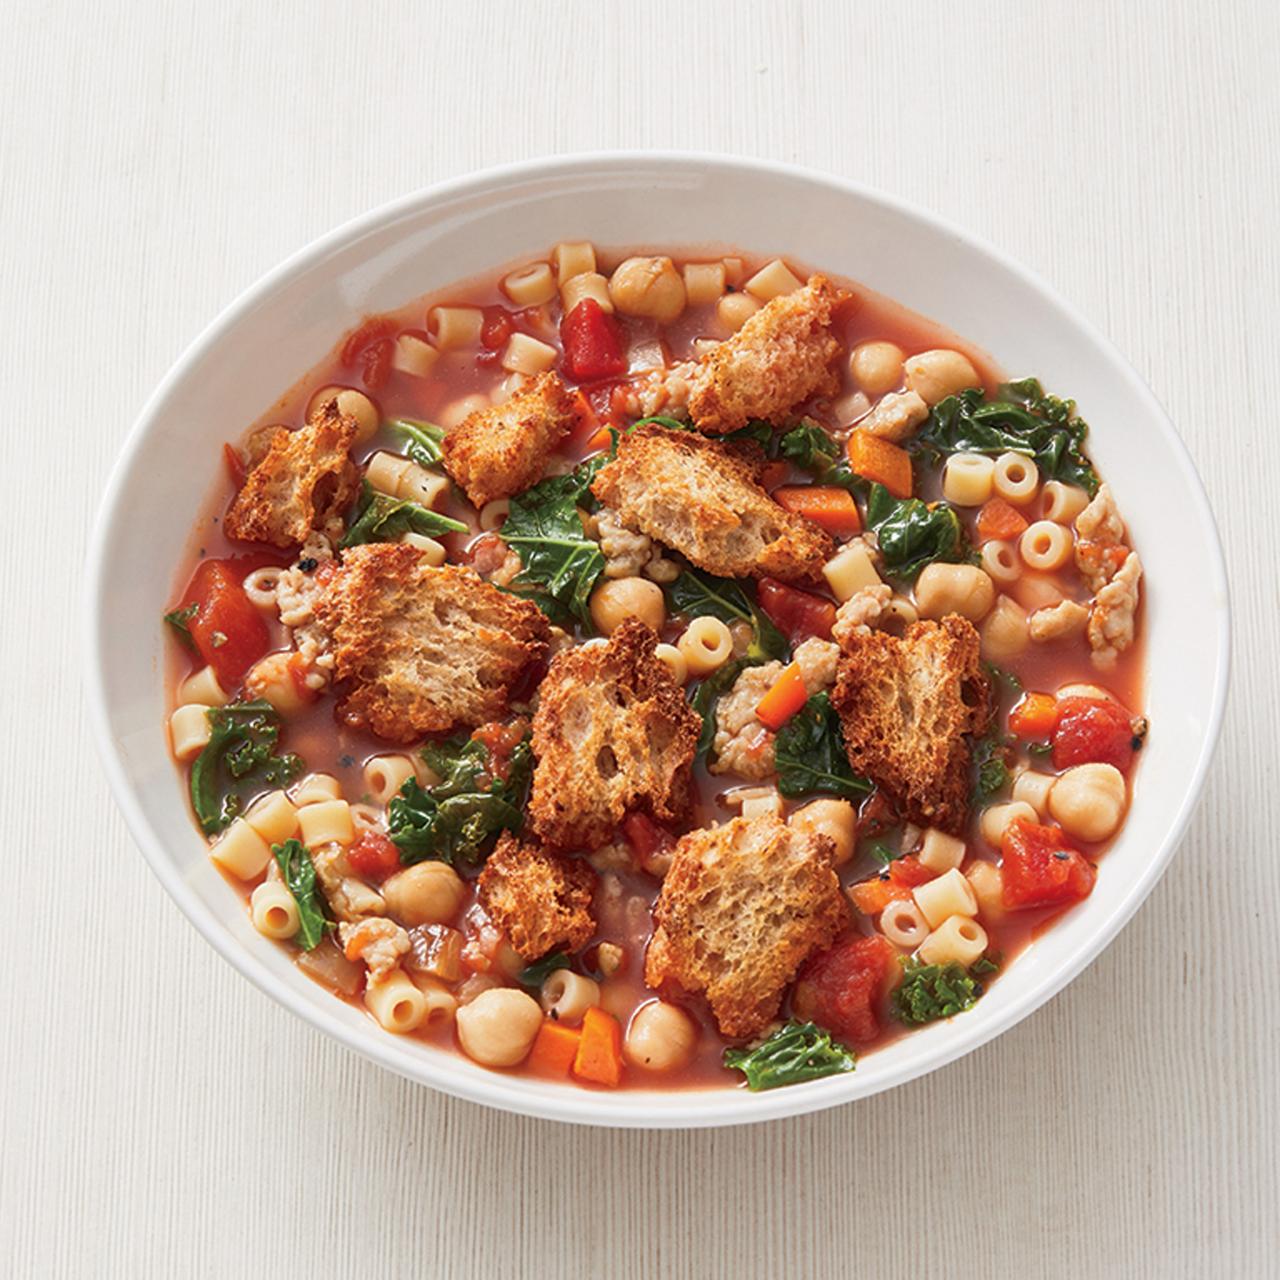 https://food.fnr.sndimg.com/content/dam/images/food/fullset/2018/10/29/0/FNM_110118-Minestrone-with-Kale-and-Turkey-Sausage_s4x3.jpg.rend.hgtvcom.1280.1280.suffix/1540856949459.jpeg